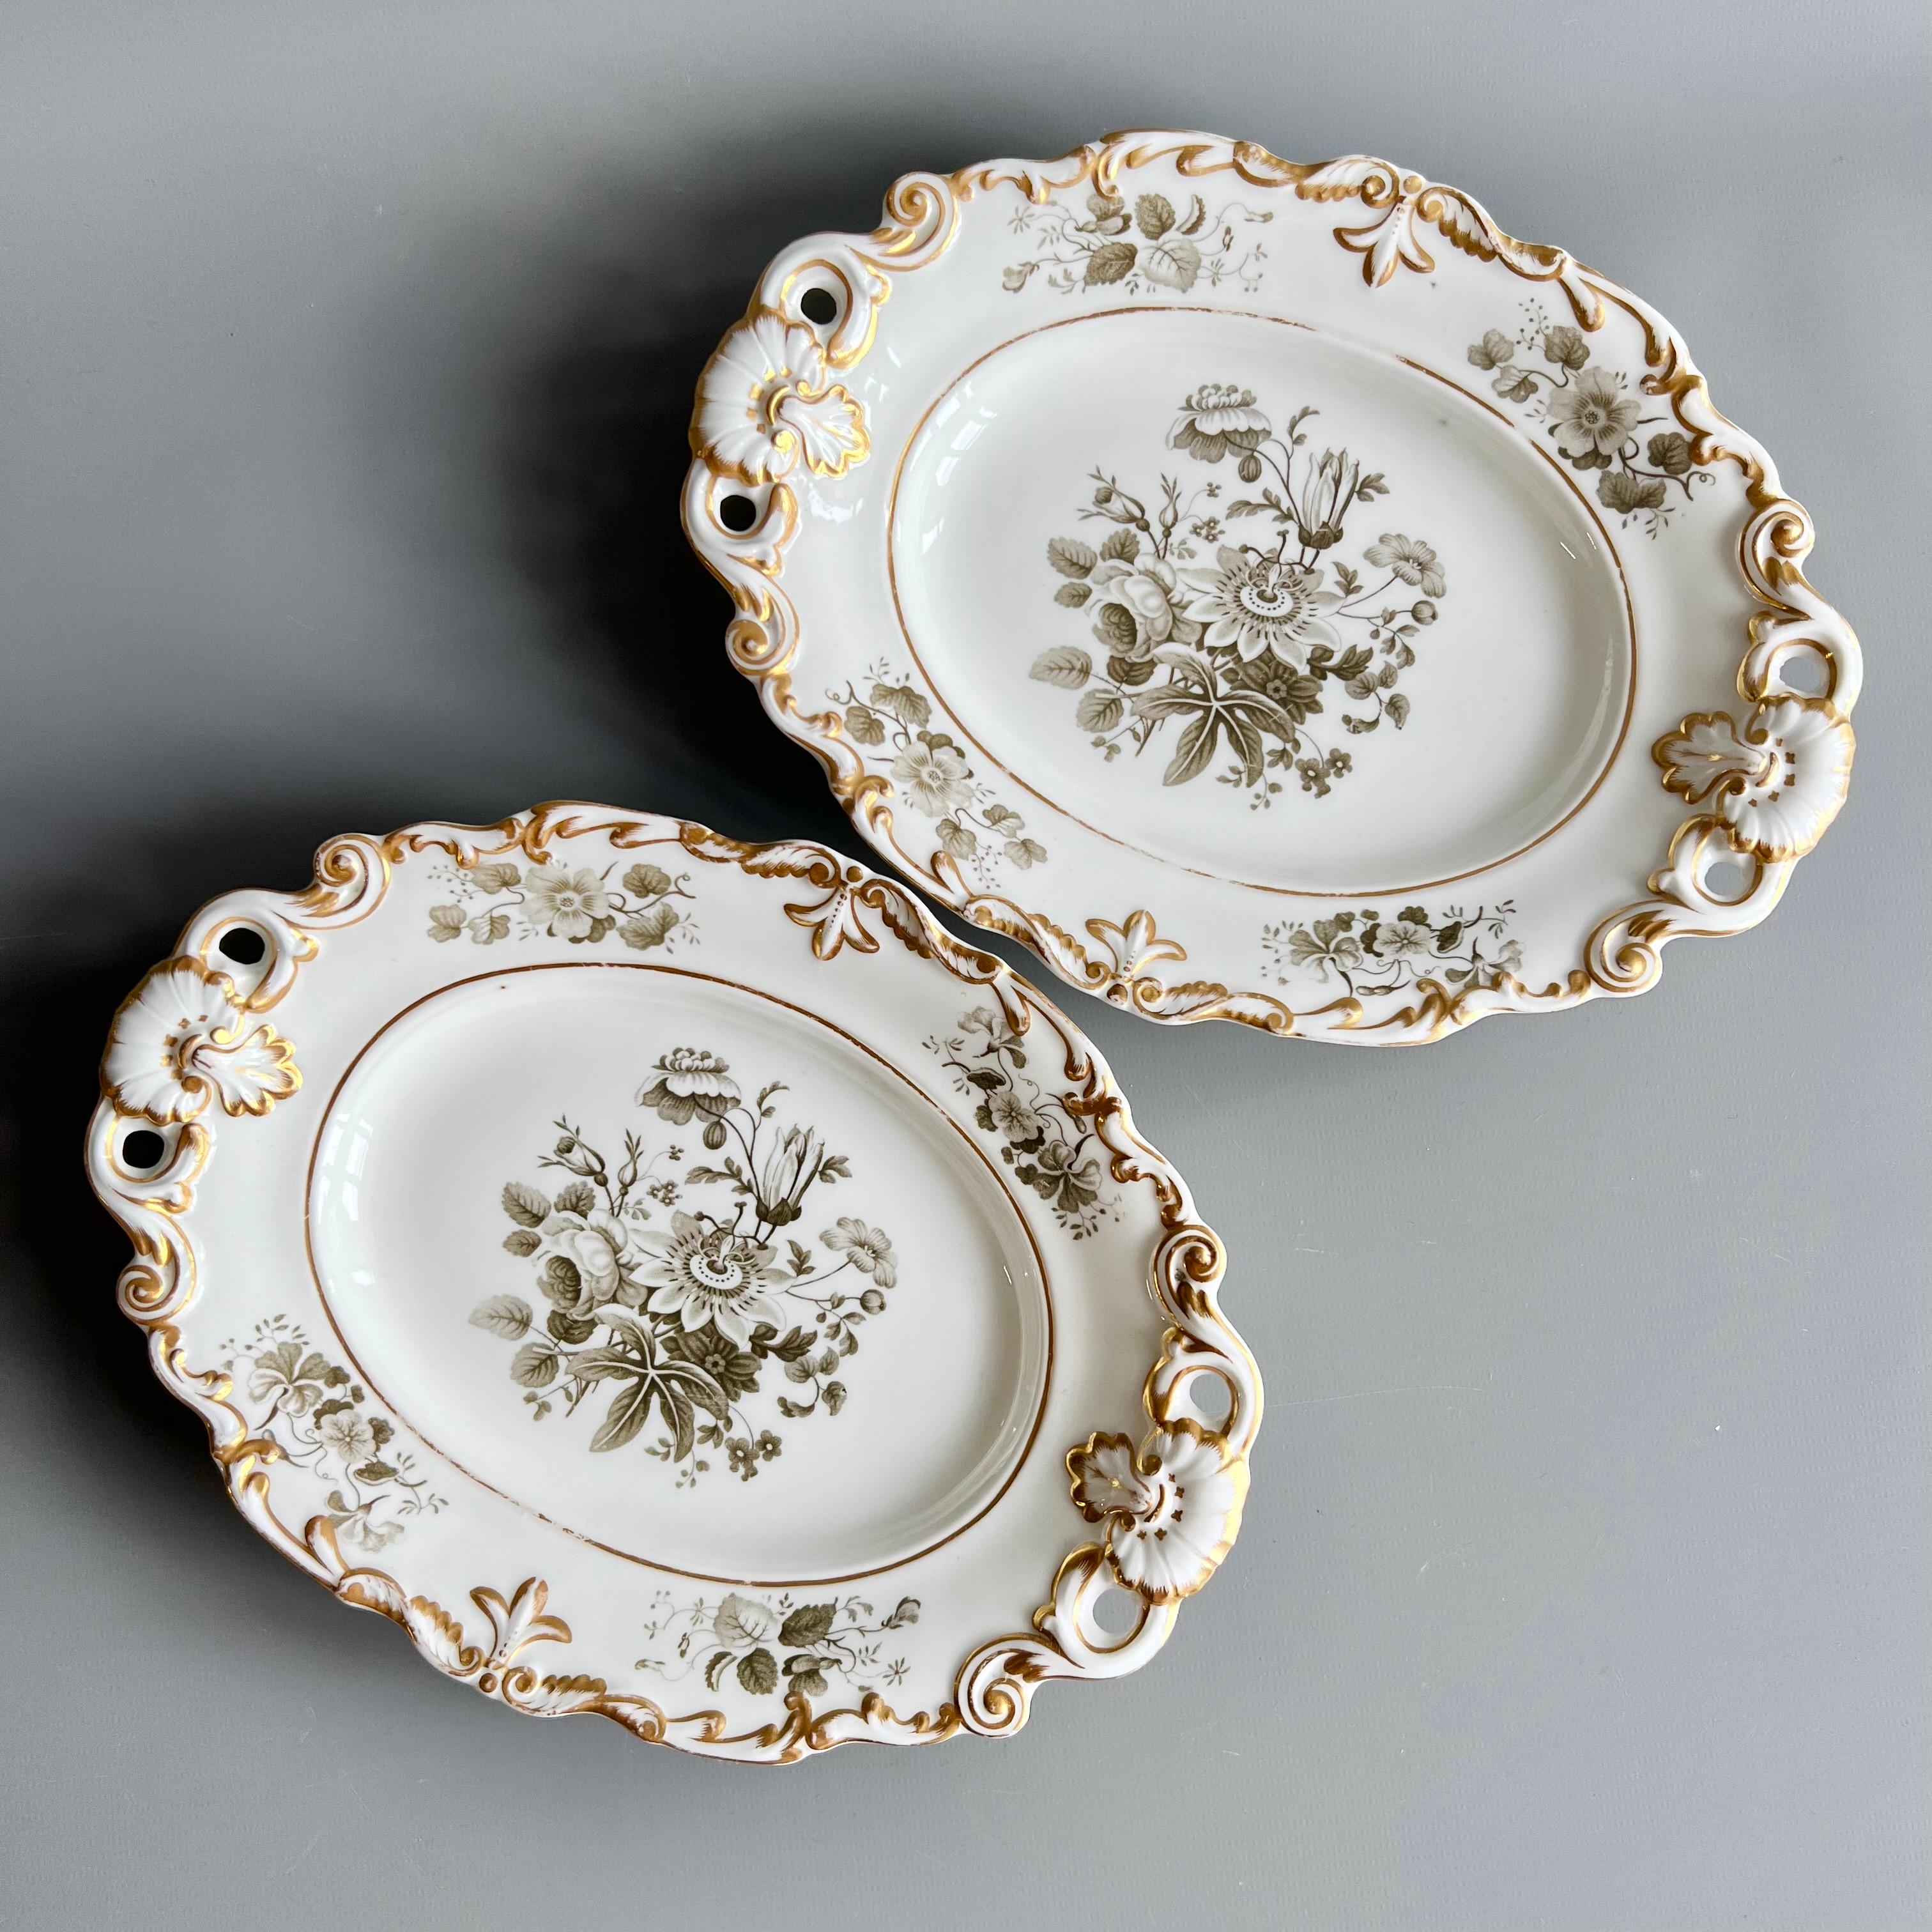 English Minton Dessert Service, Inverted Shell White with Monochrome Flowers, ca 1830 For Sale